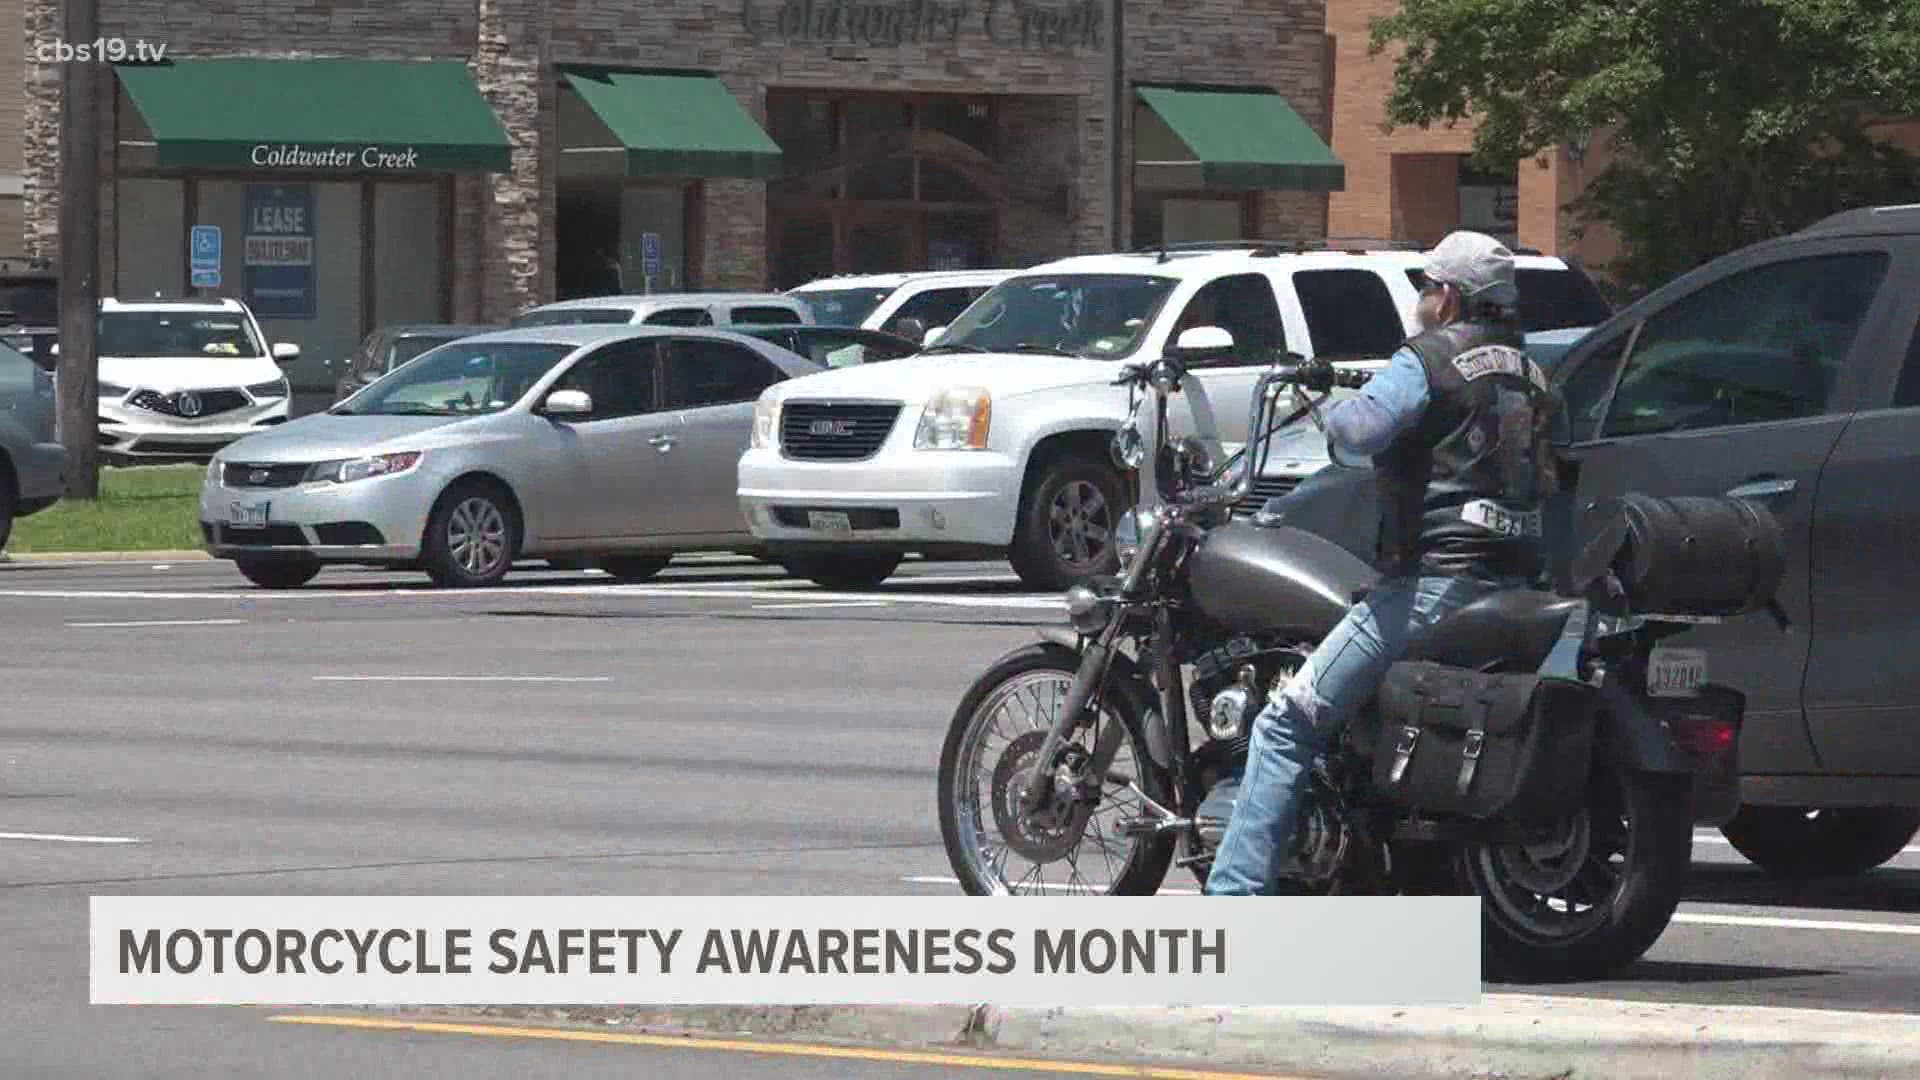 TxDOT is launching its "Share the Road: Look Twice for Motorcycles" campaign to call attention to the safety precautions motorists can take to protect motorcyclists.